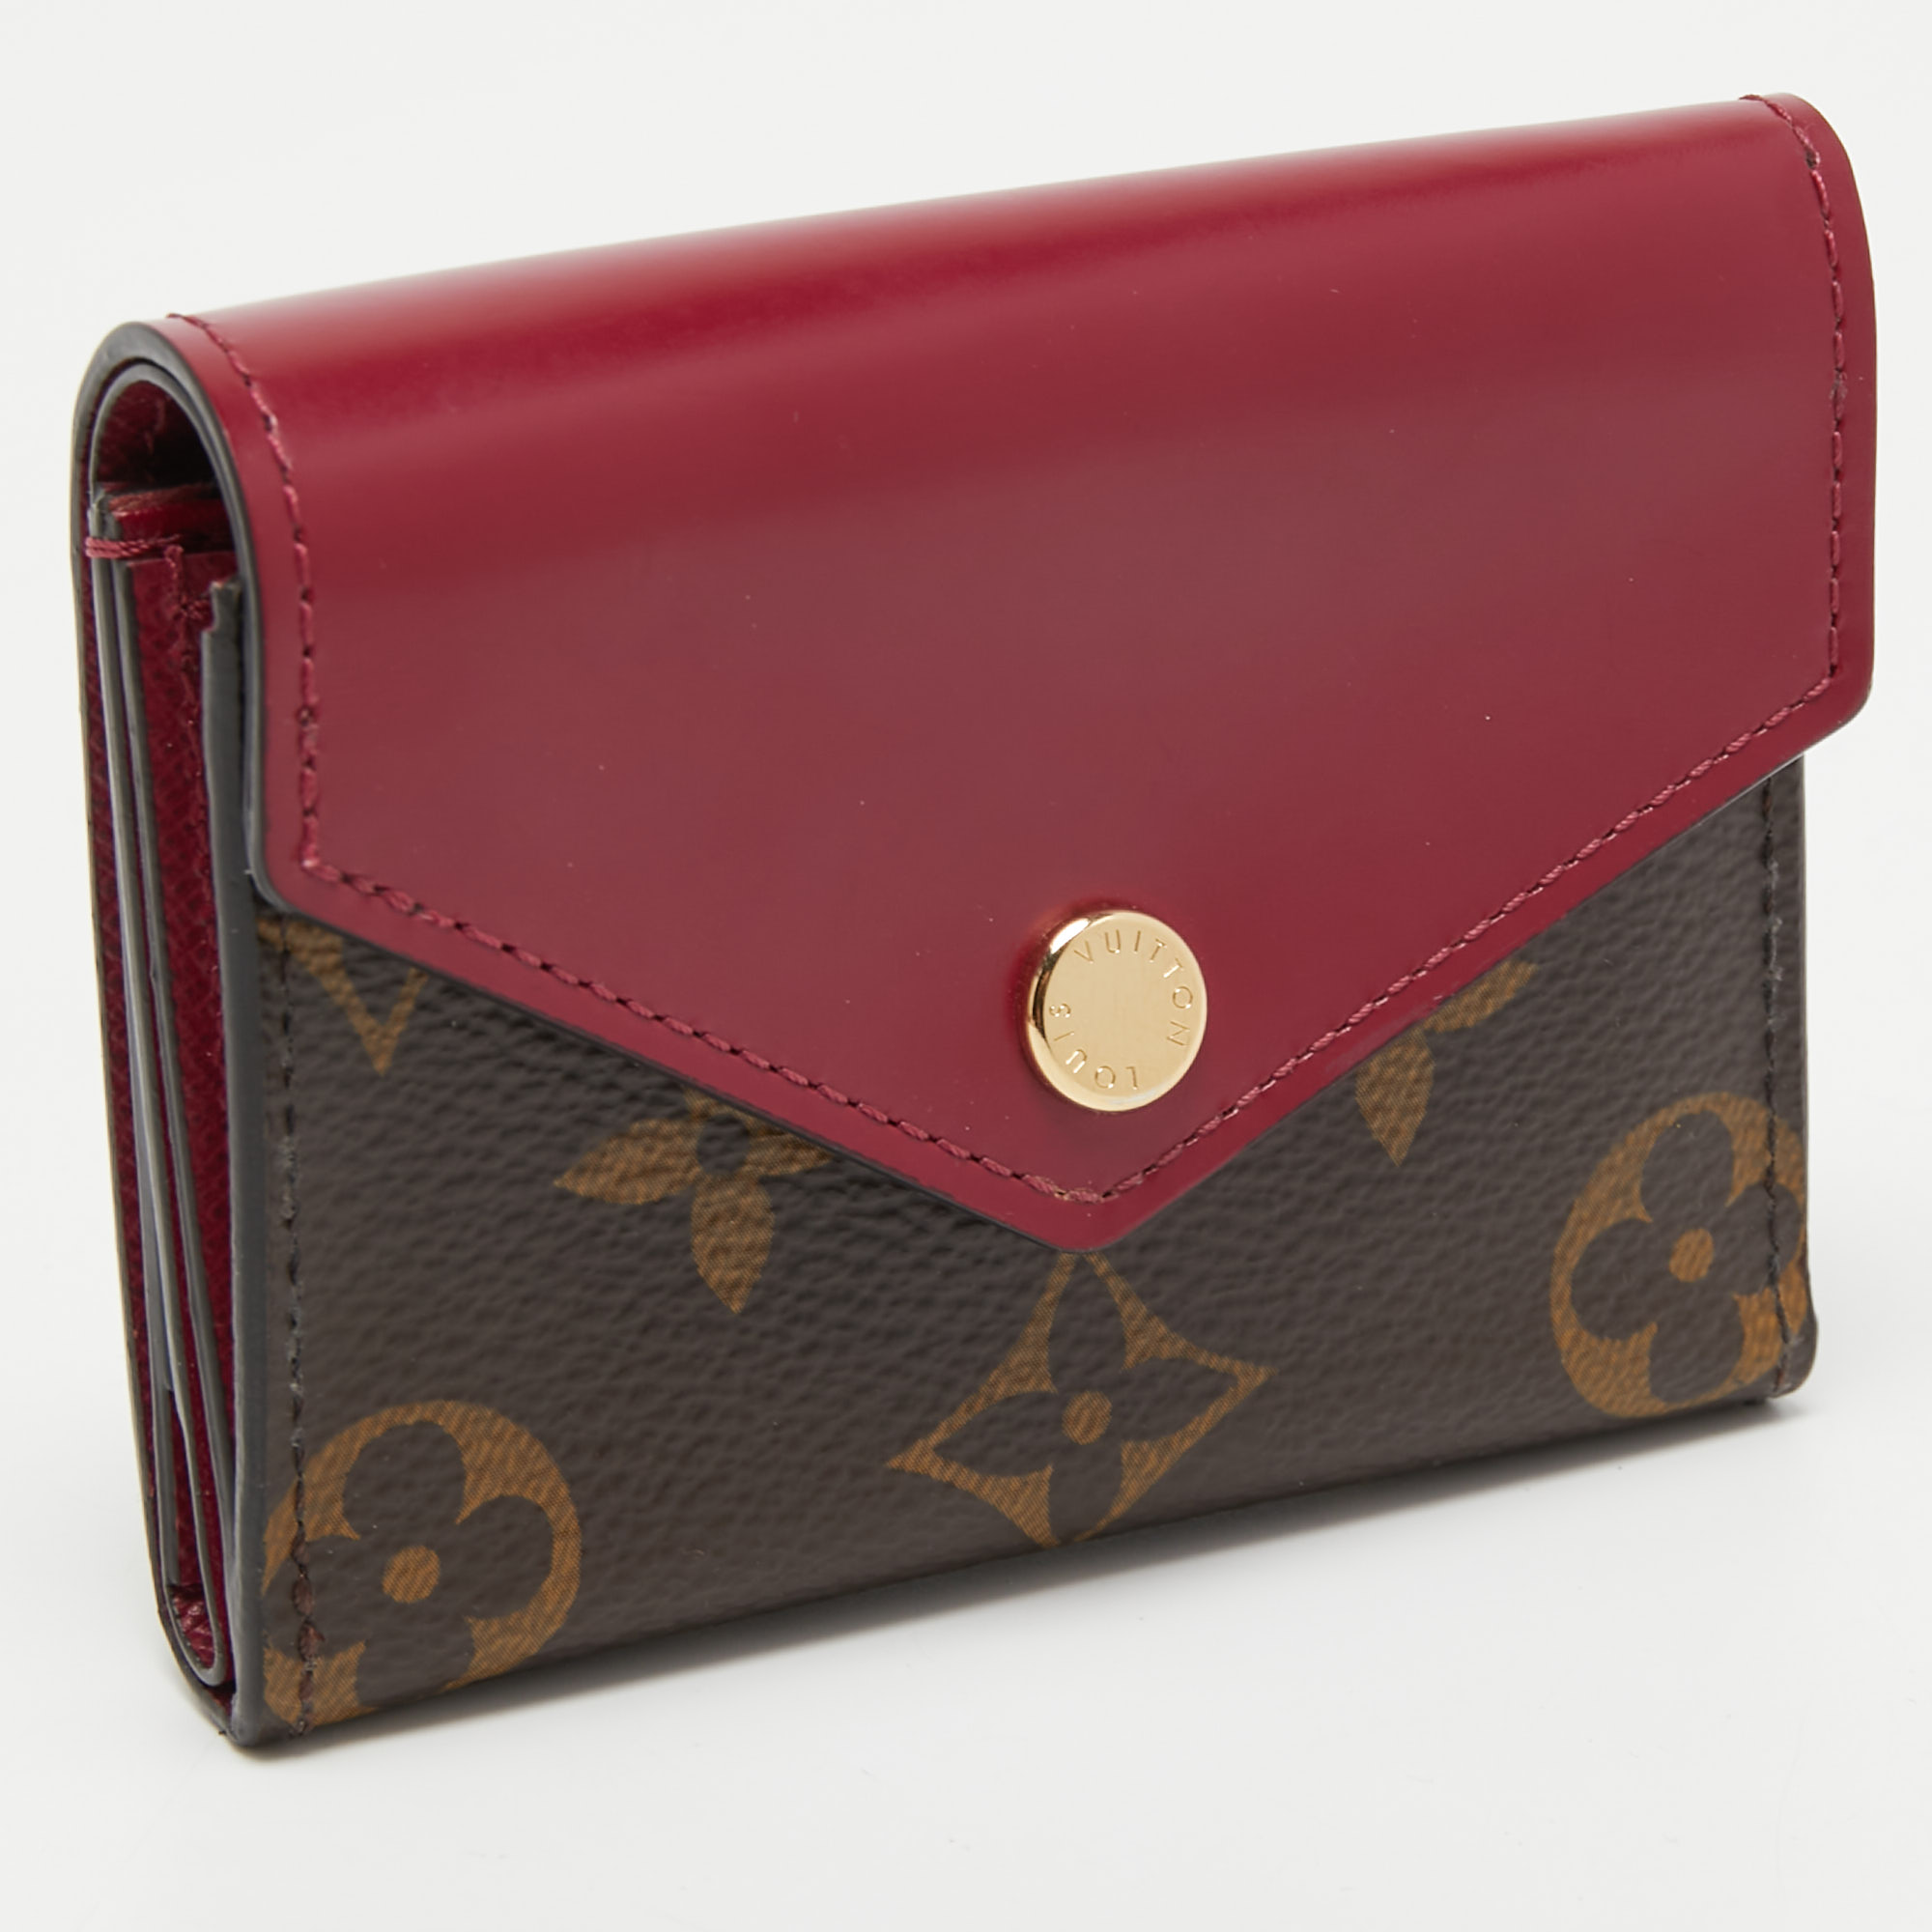 Louis Vuitton Fuchsia Monogram Canvas and Leather Zoe Wallet at